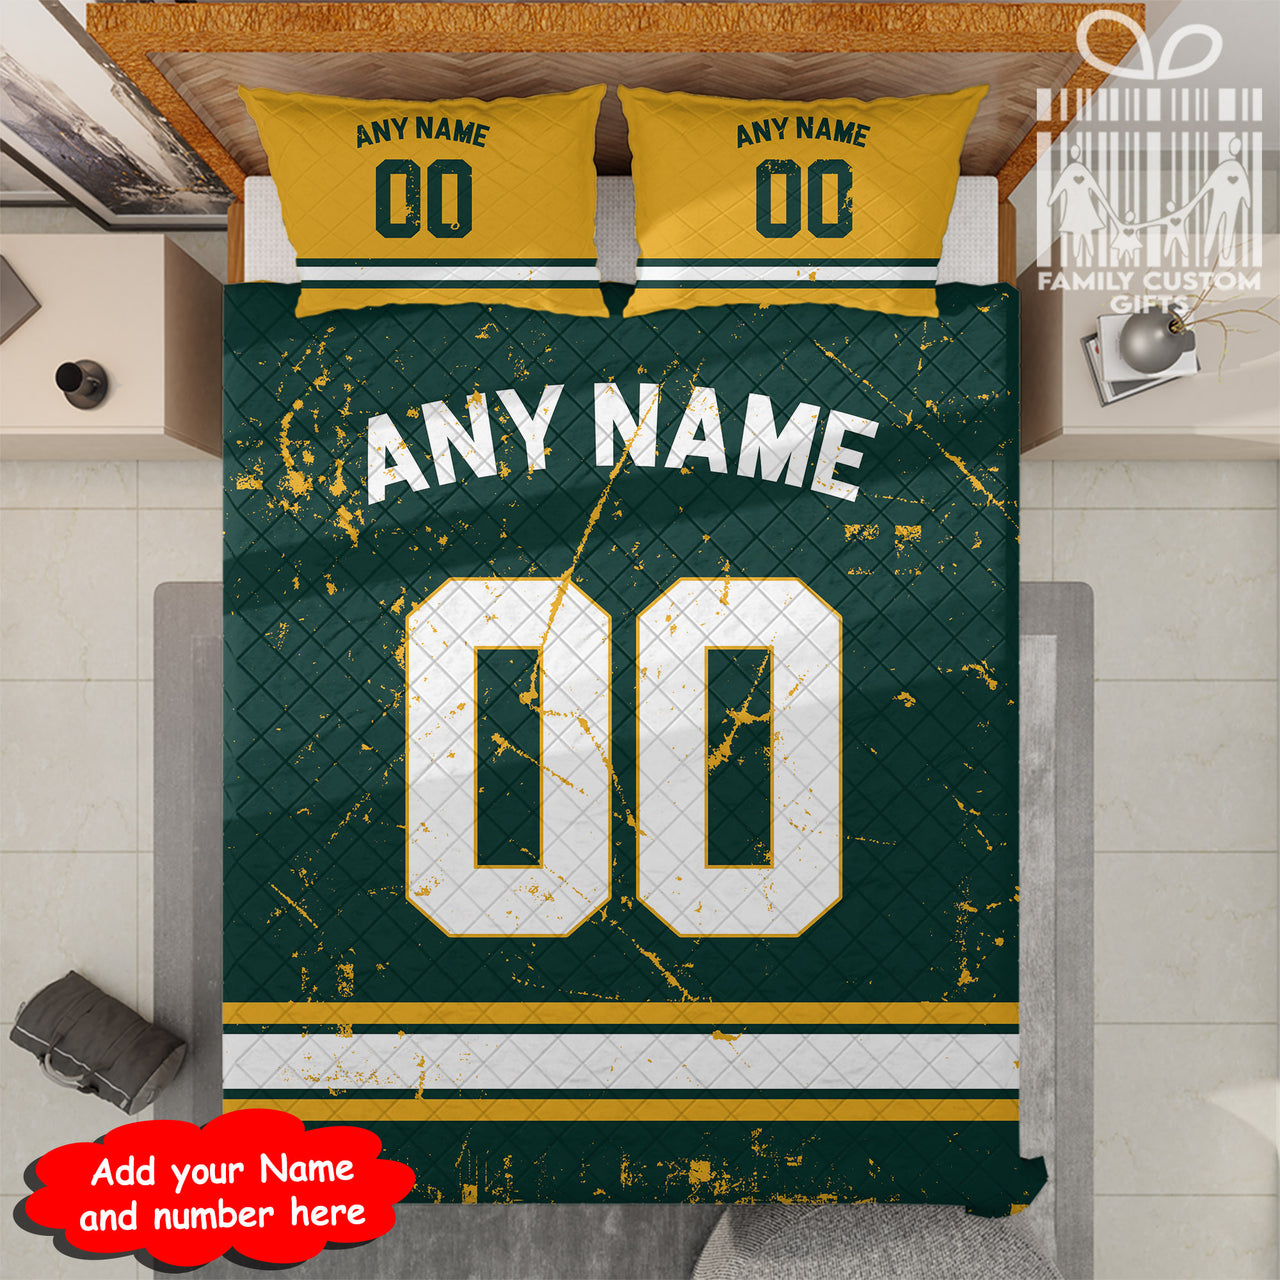 Custom Quilt Sets Green Bay Jersey Personalized Football Premium Quilt Bedding for Men Women